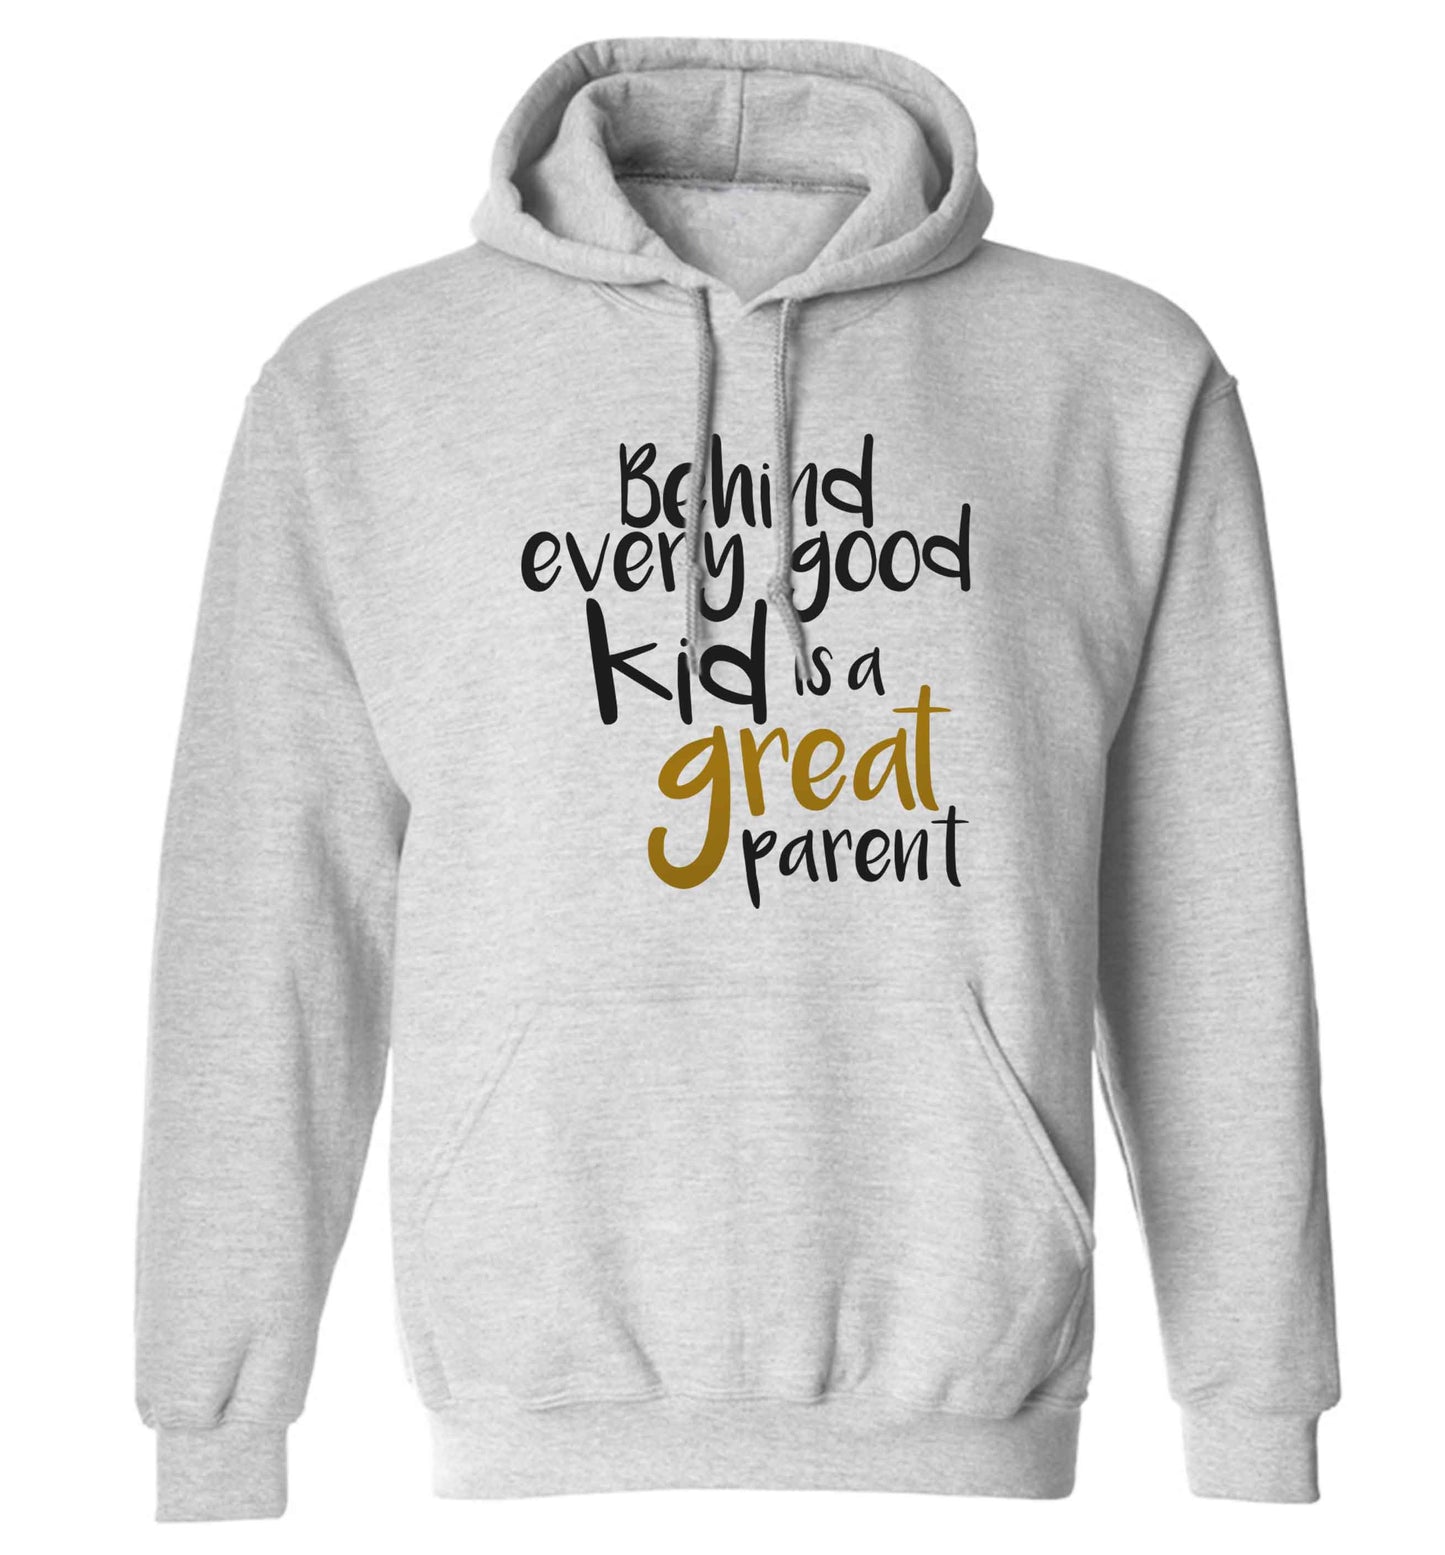 Behind every good kid is a great parent adults unisex grey hoodie 2XL